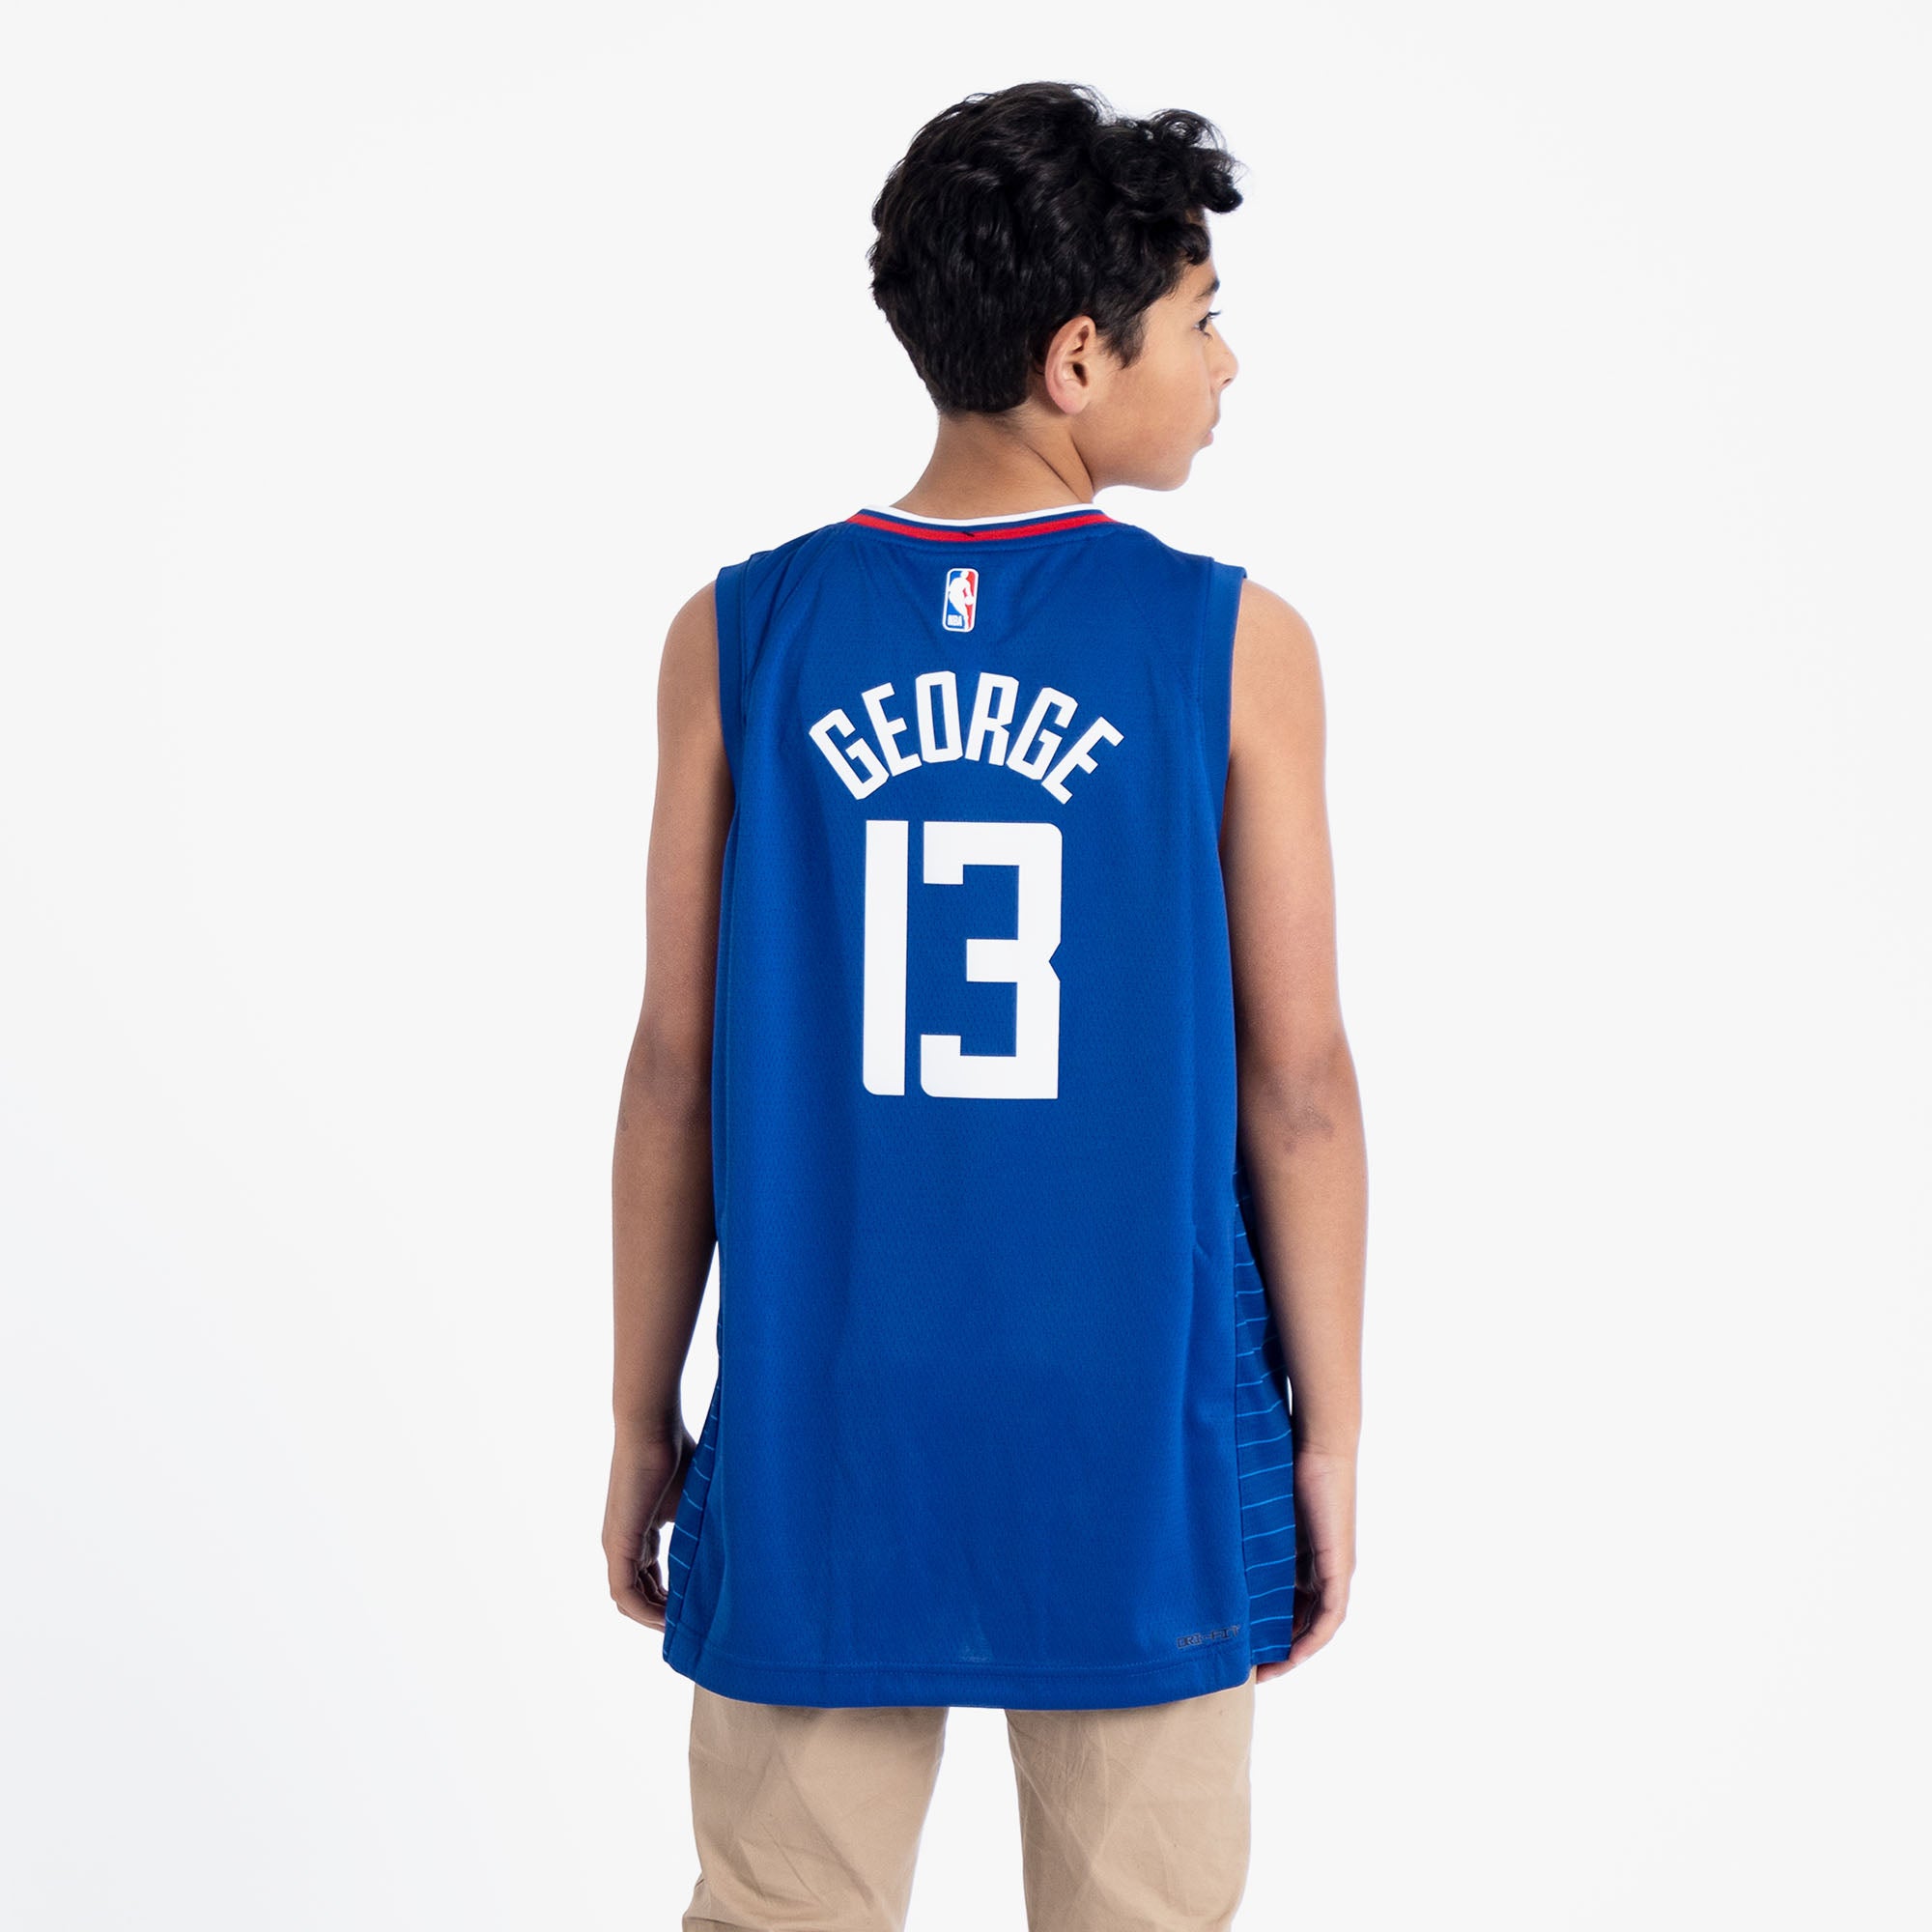  Paul George Los Angeles Clippers Light Blue #13 Youth 8-20  Alternate Edition Swingman Player Jersey (8) : Sports & Outdoors